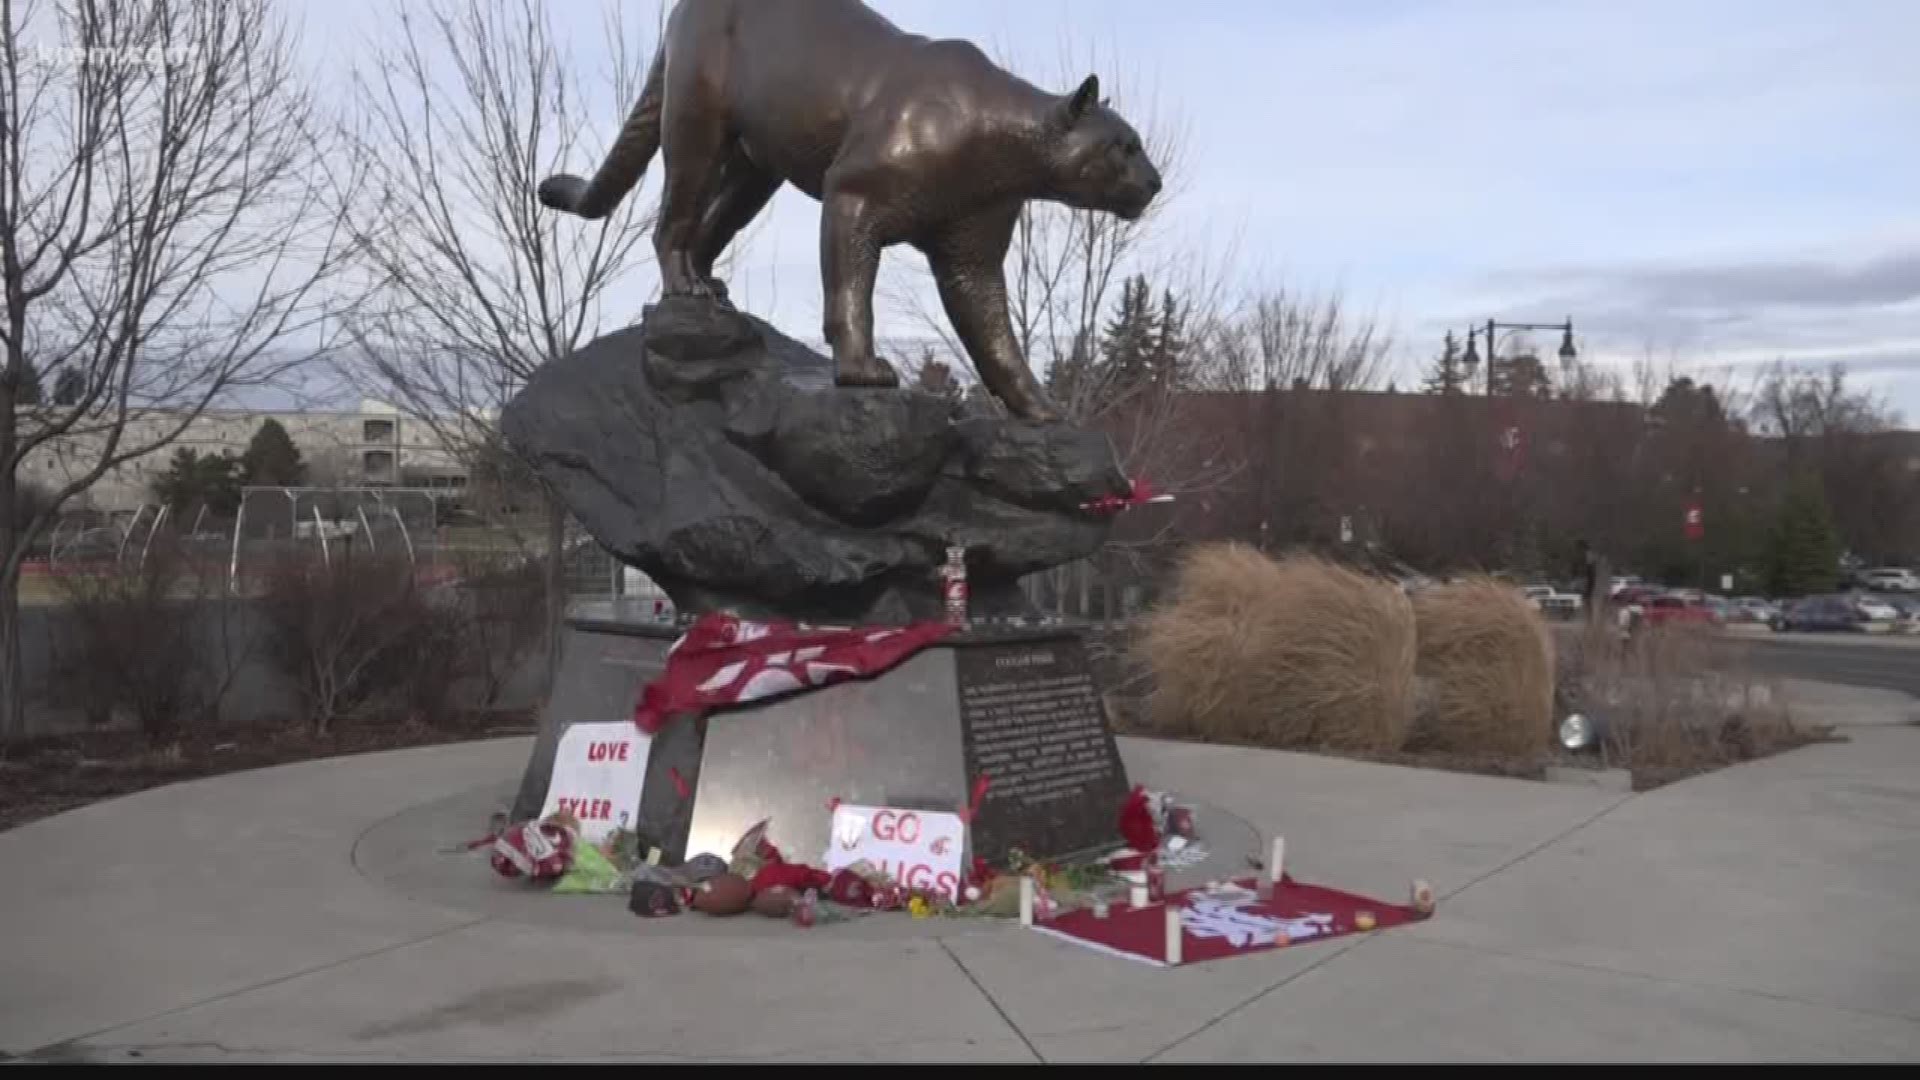 Students pay their respects to WSU football player who died Tuesday